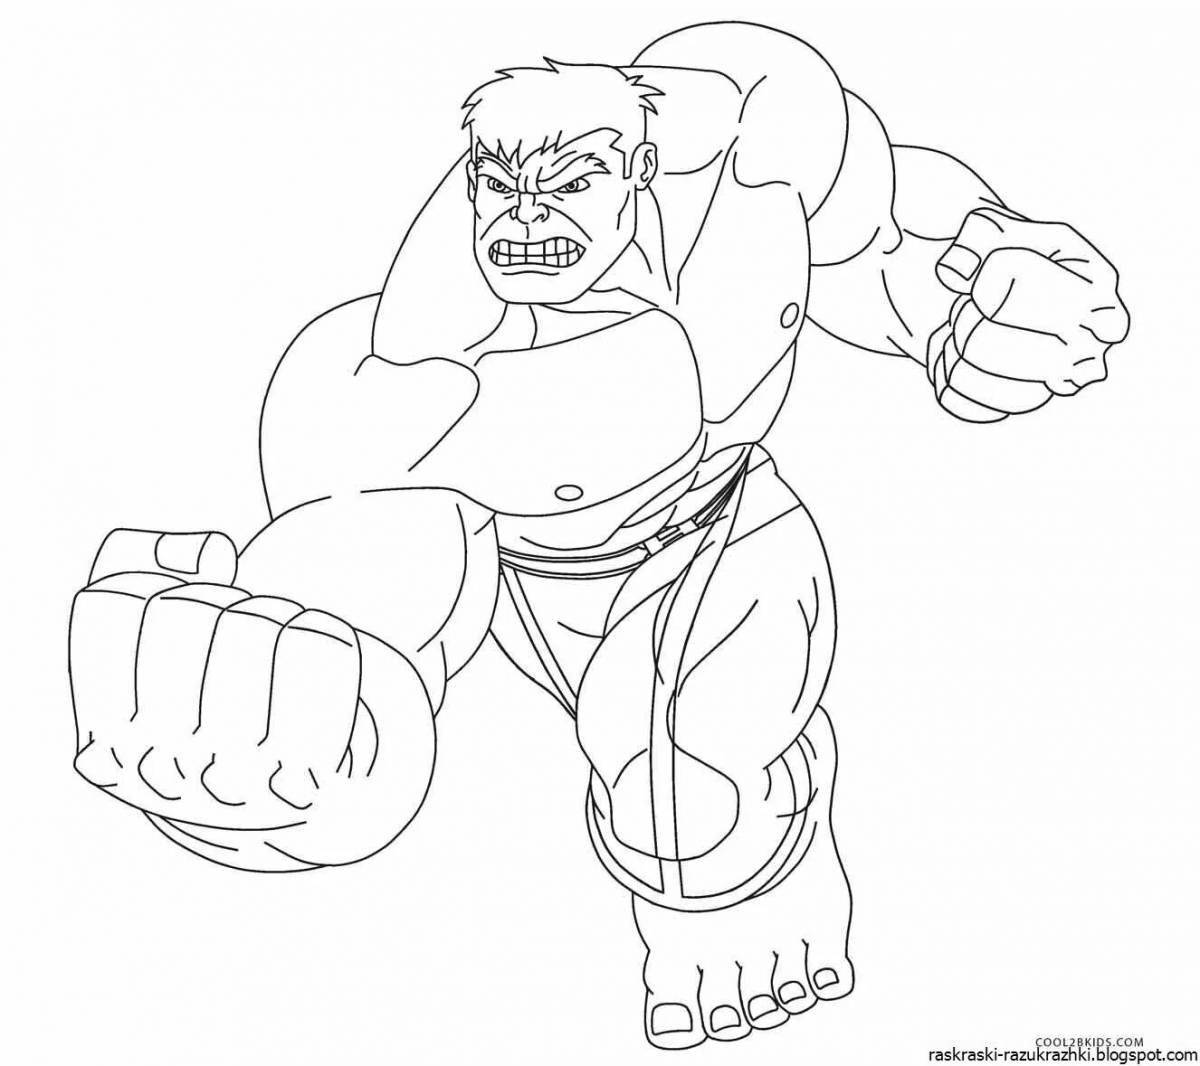 Exquisite hulk coloring book for 5-6 year olds